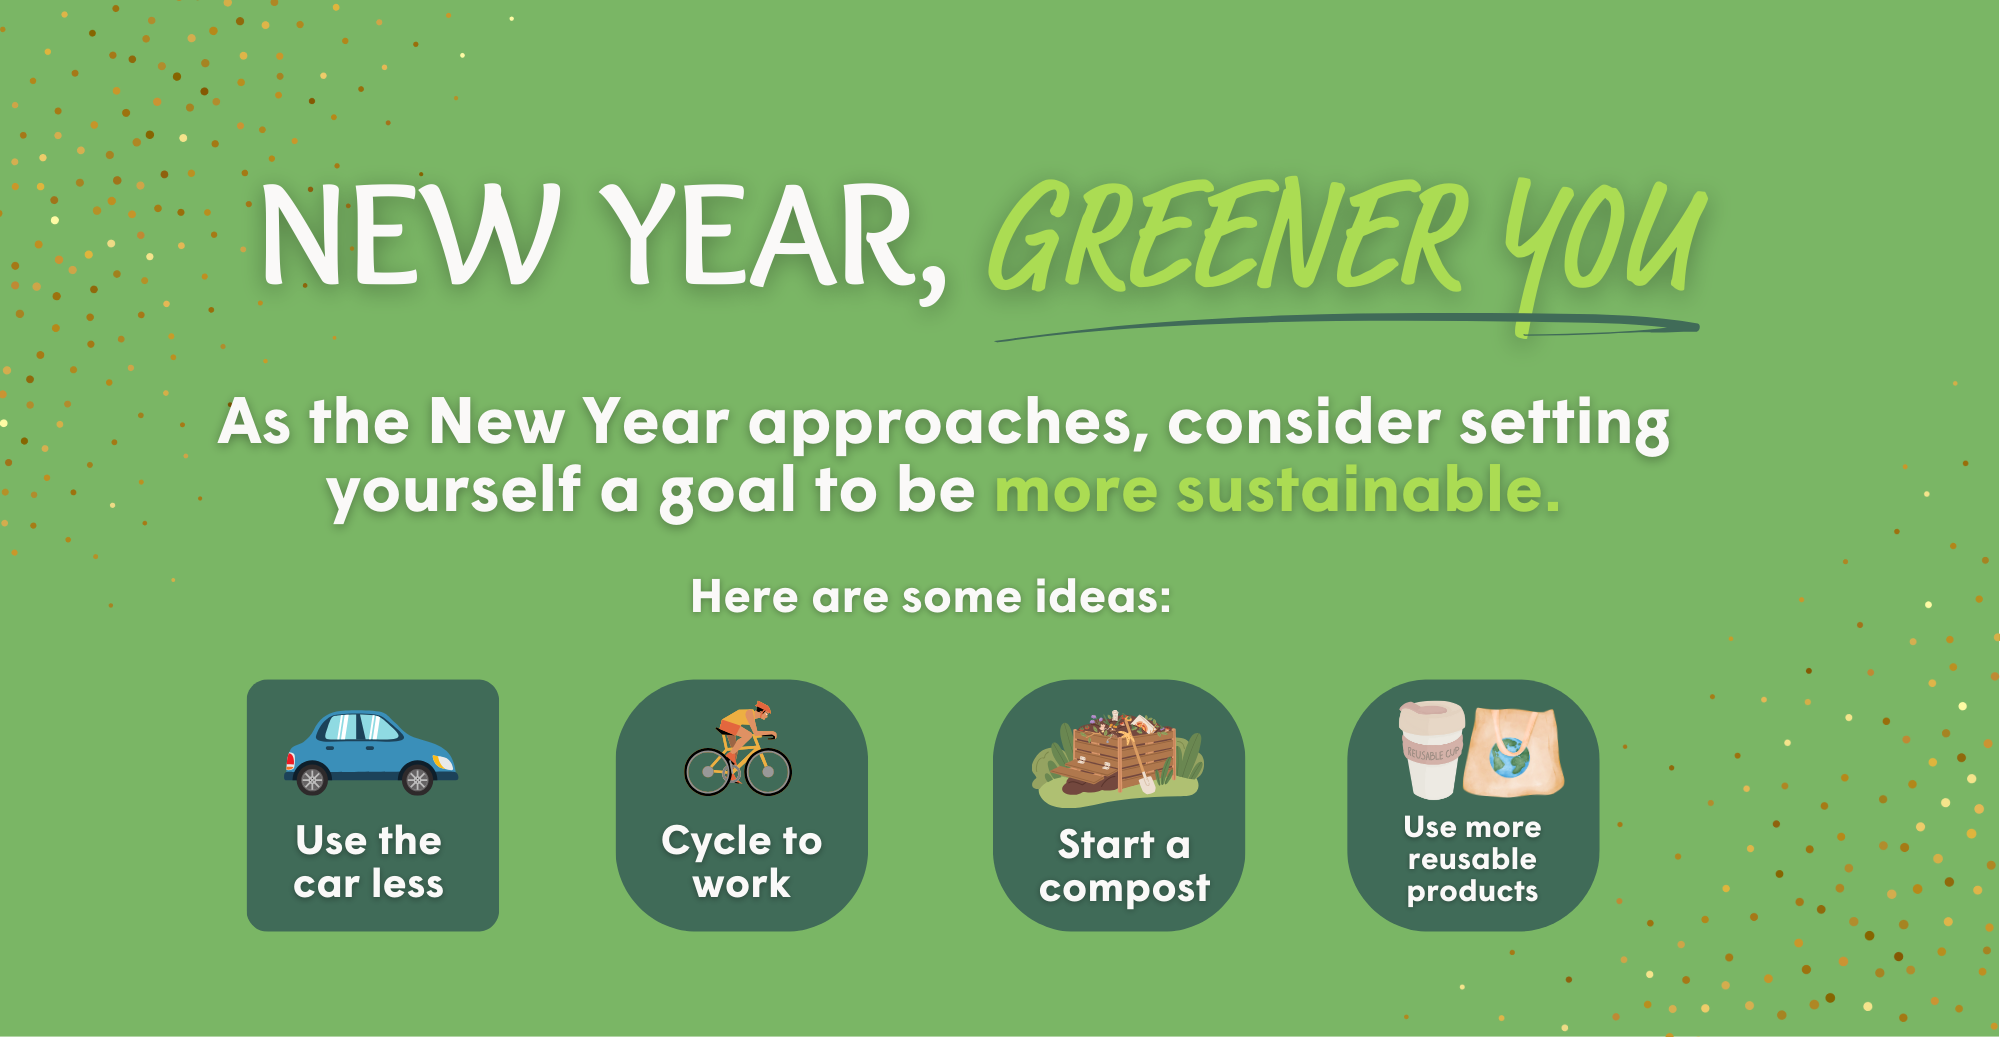 New Year, greener you: set a sustainable resolution this year